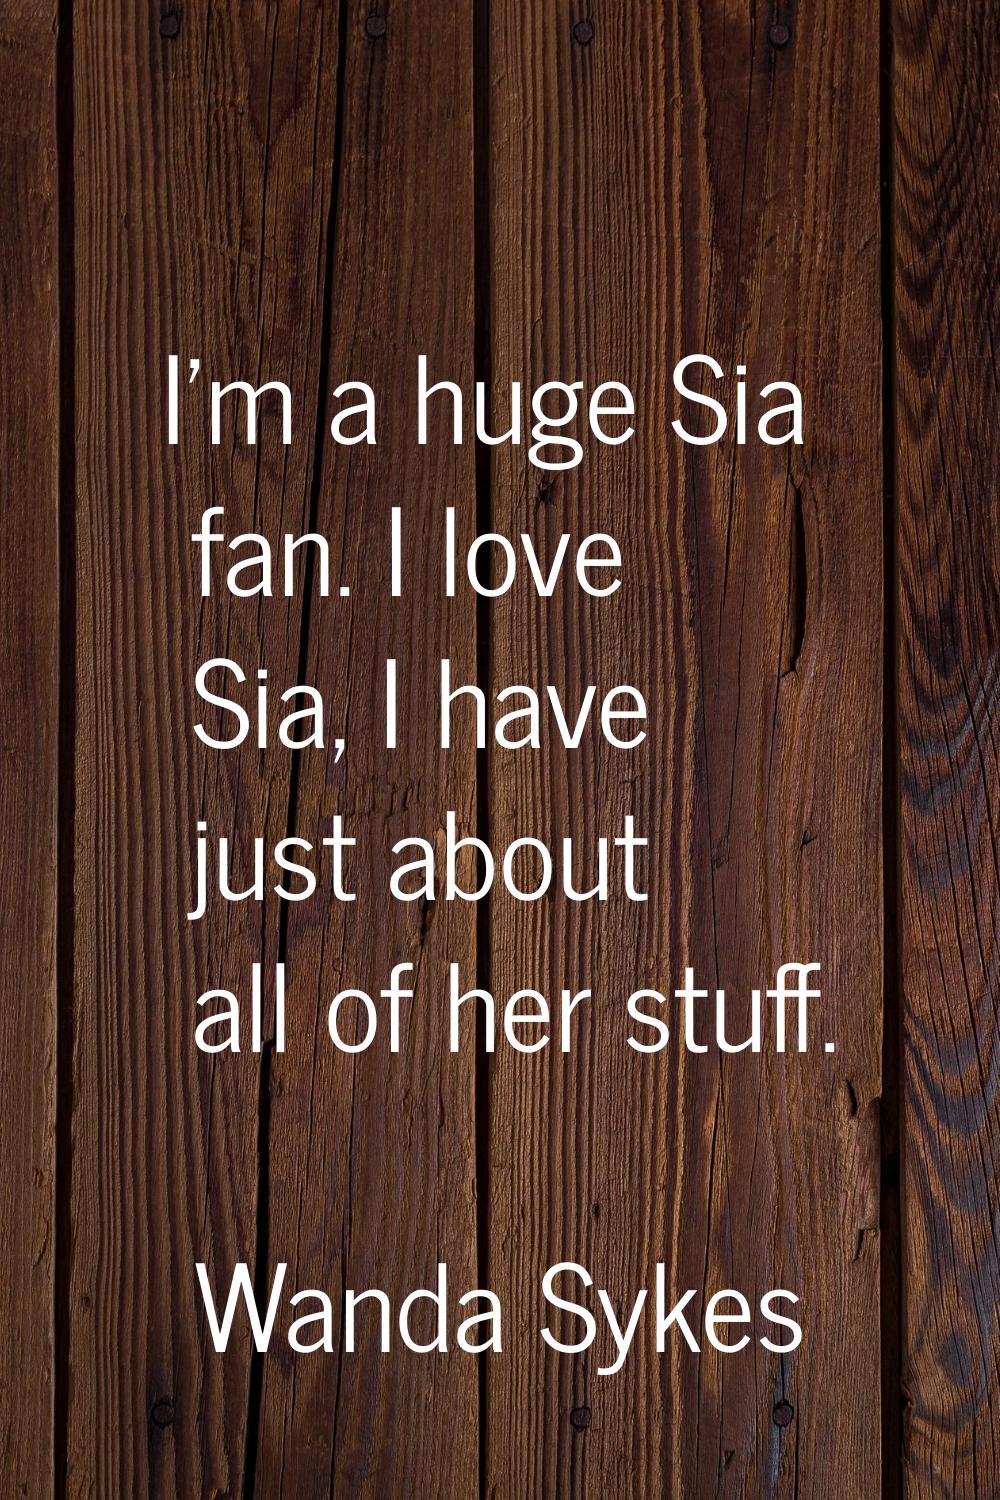 I'm a huge Sia fan. I love Sia, I have just about all of her stuff.